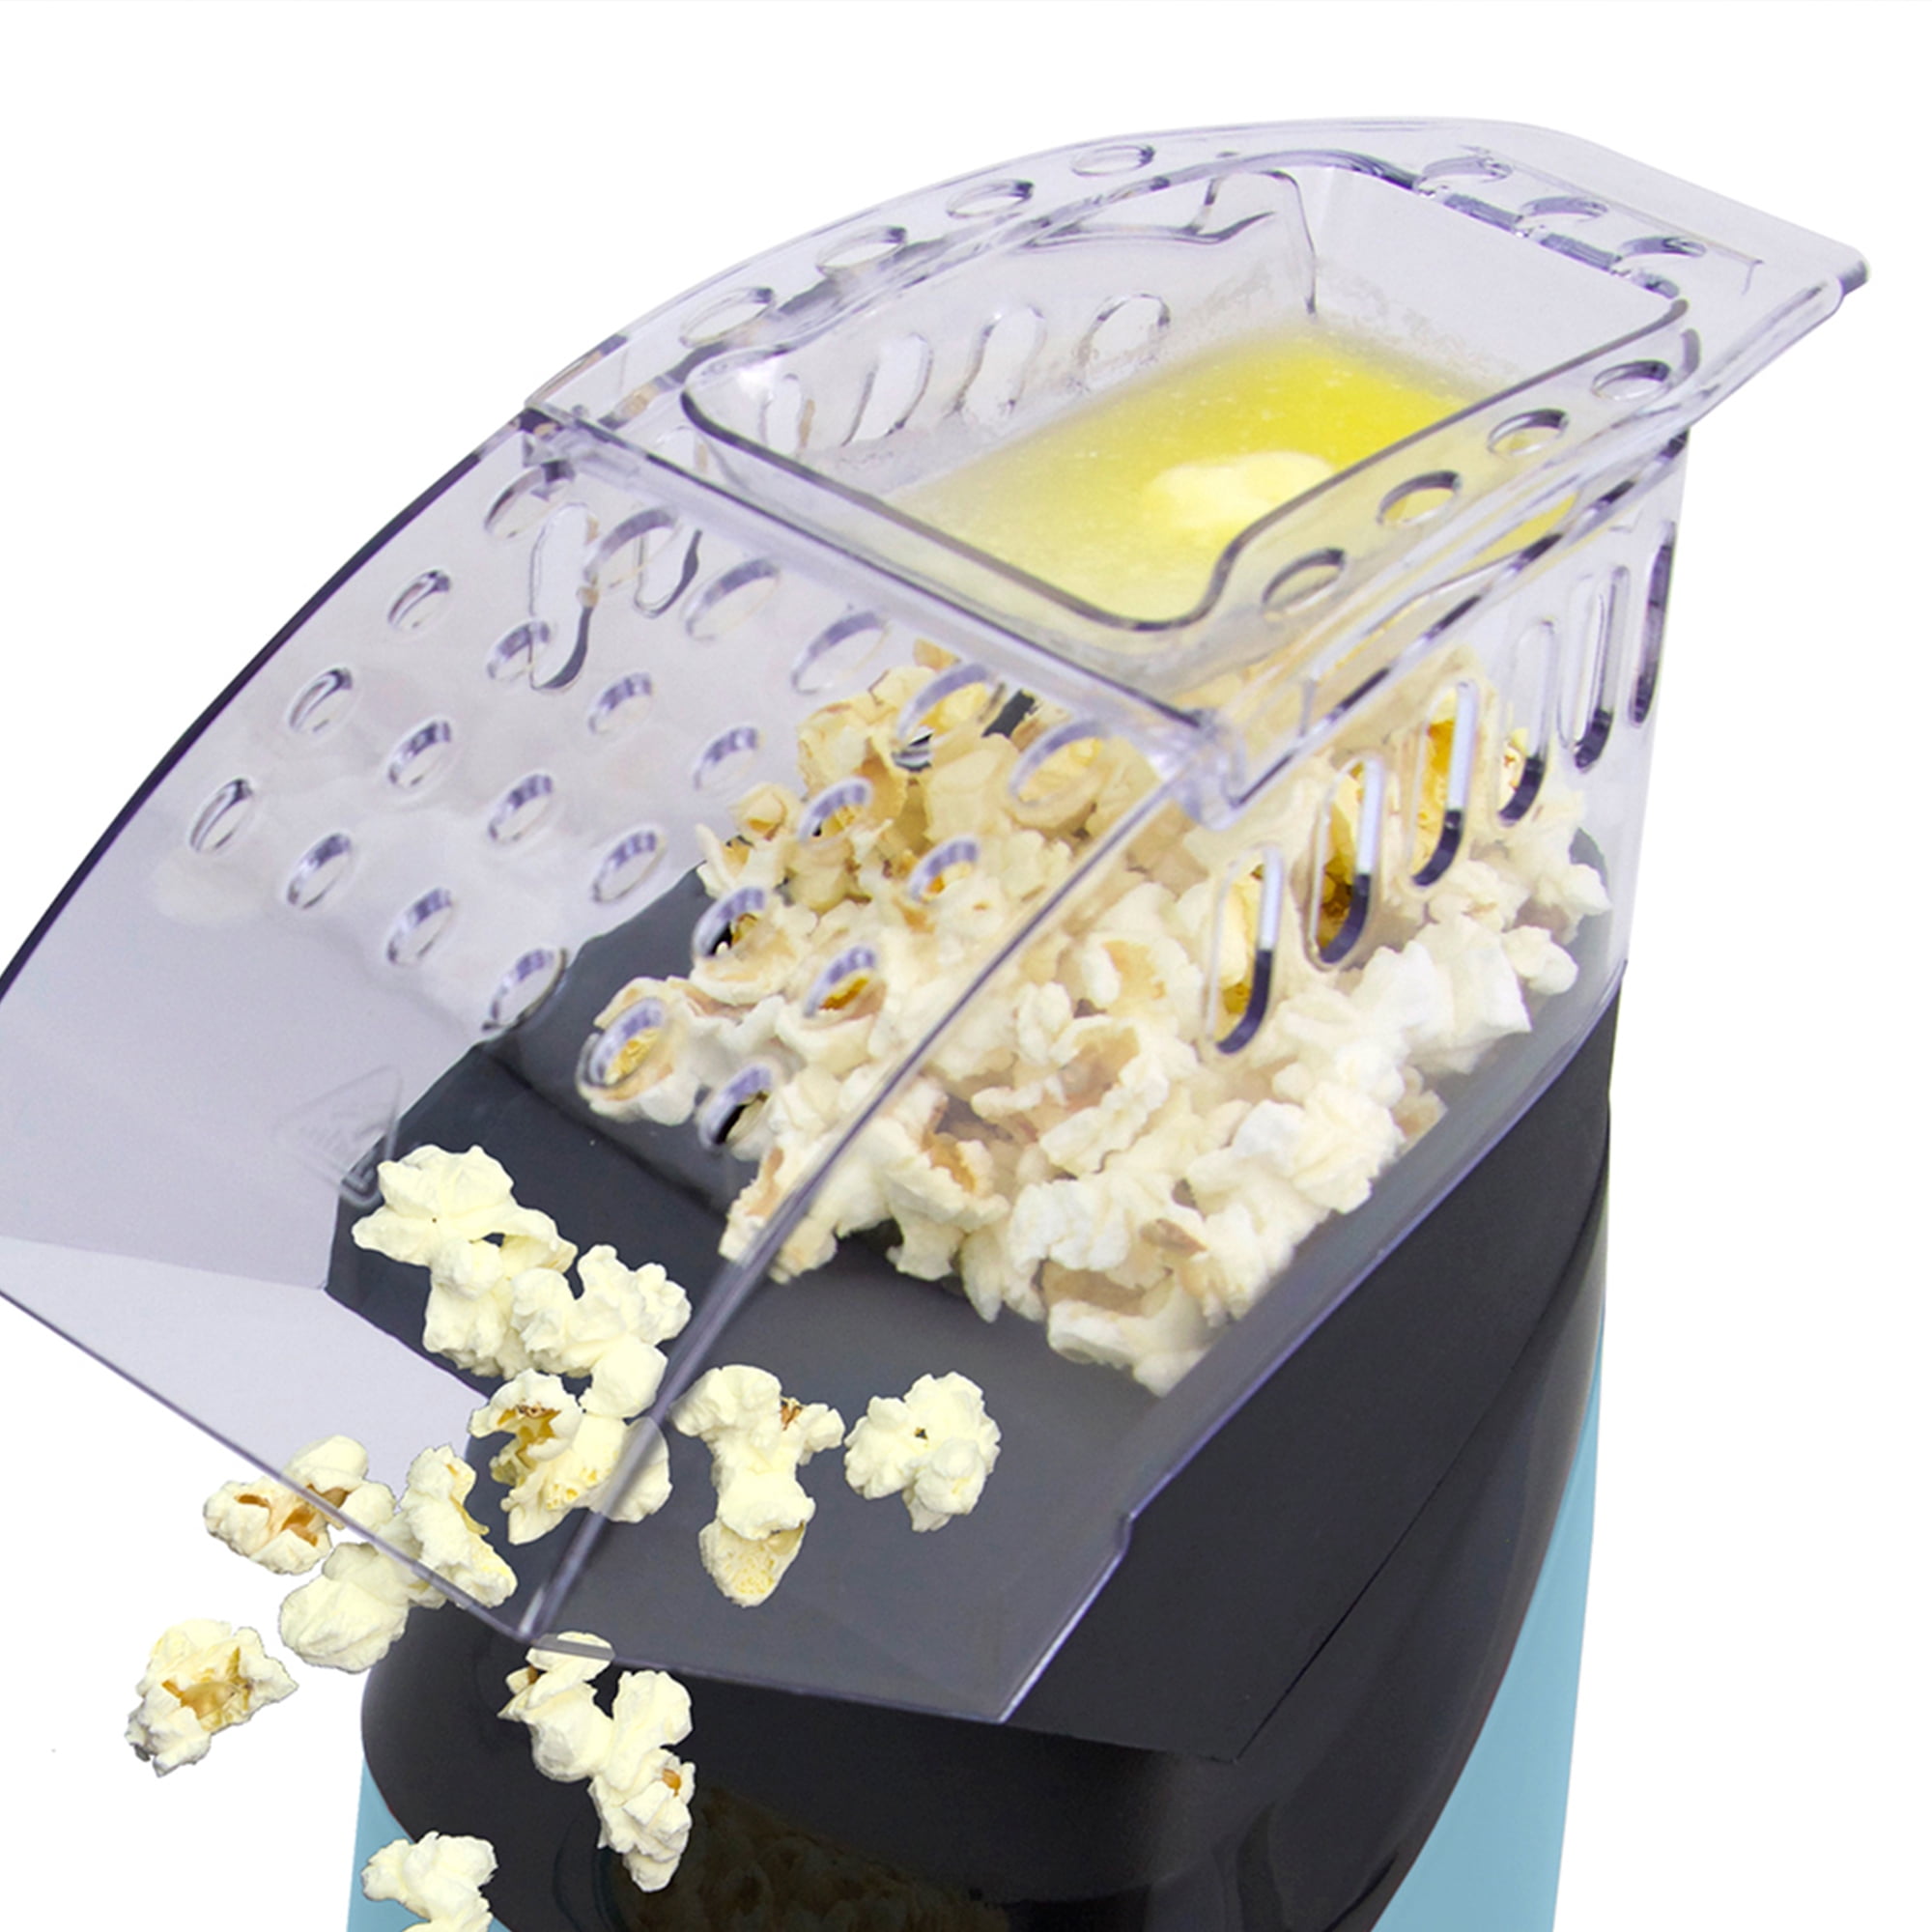 West Bend Tabletop Popcorn Machine with Butter Melting Feature, Countertop Popcorn  Maker, 6 Quart Capacity, cETL Safety Listed